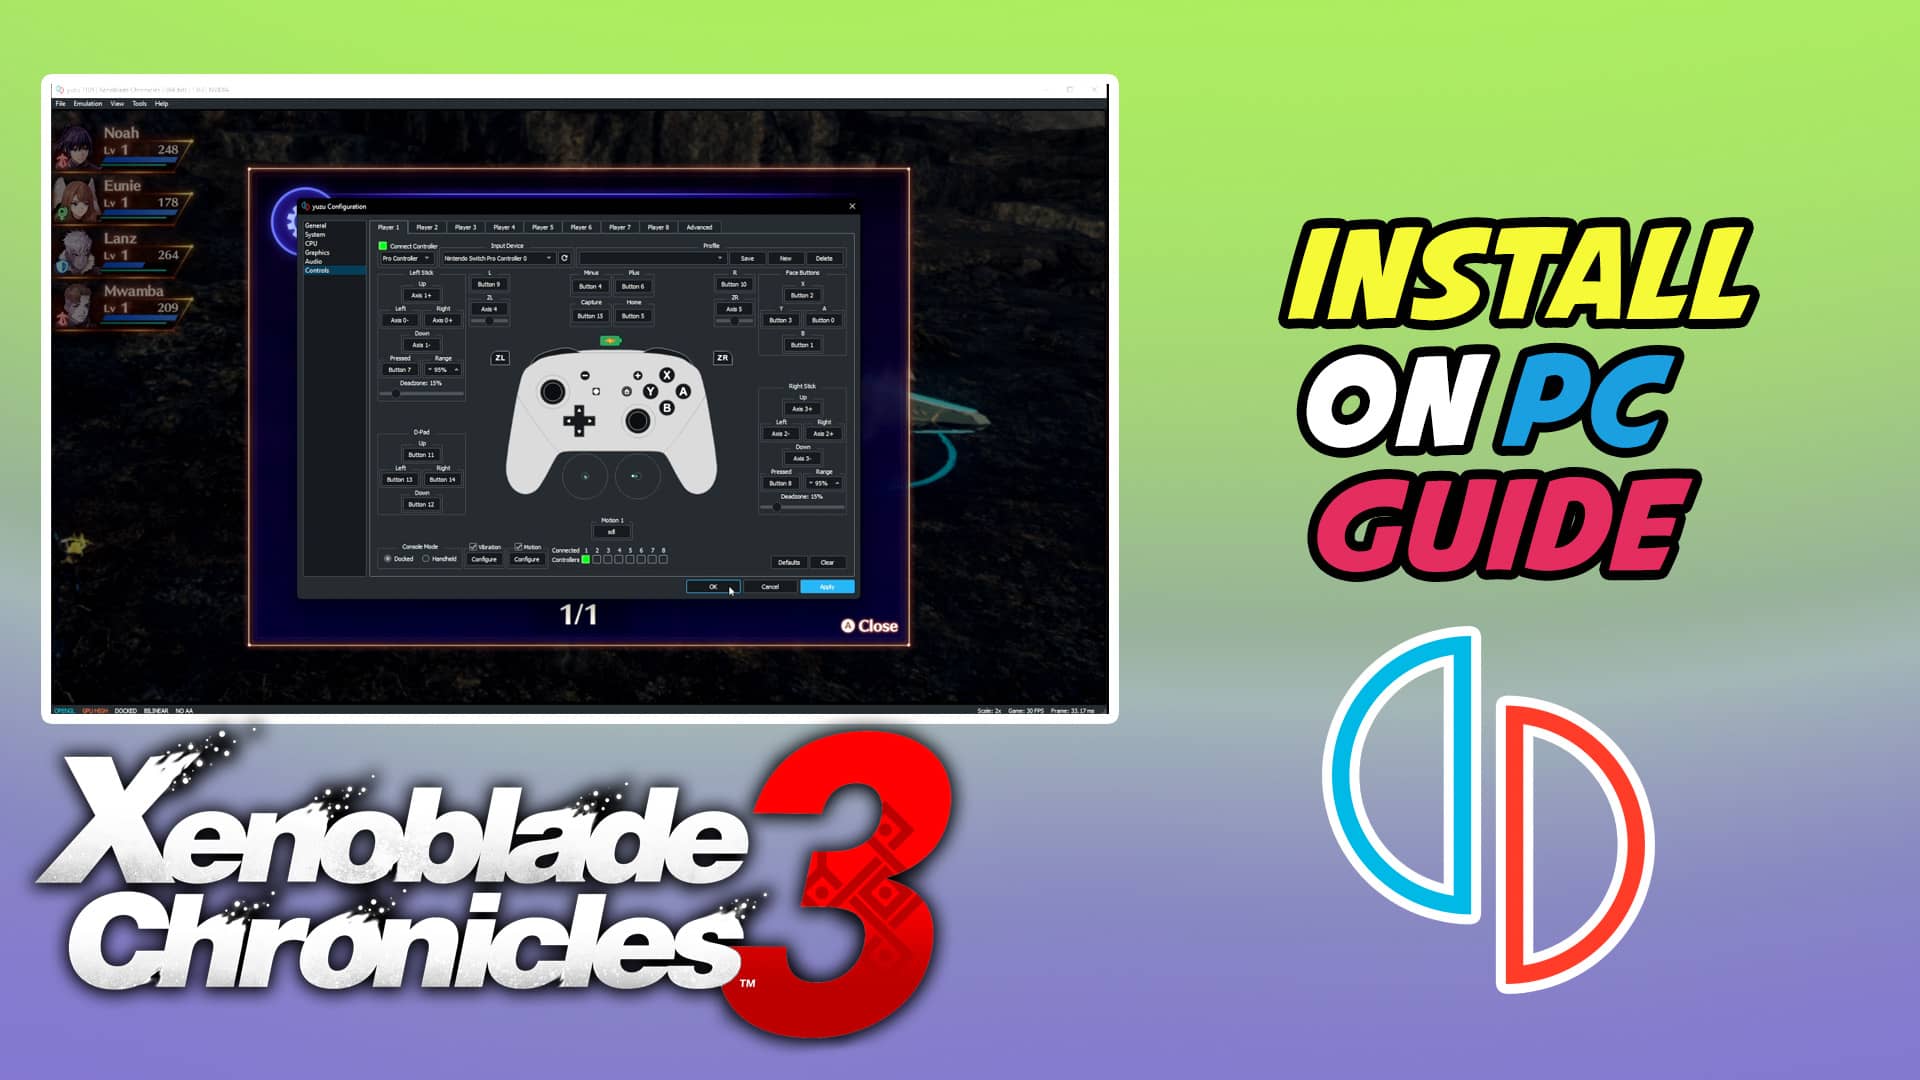 Xenoblade Chronicles 3 Yuzu Gameplay & Installation Guide for PC on Vimeo